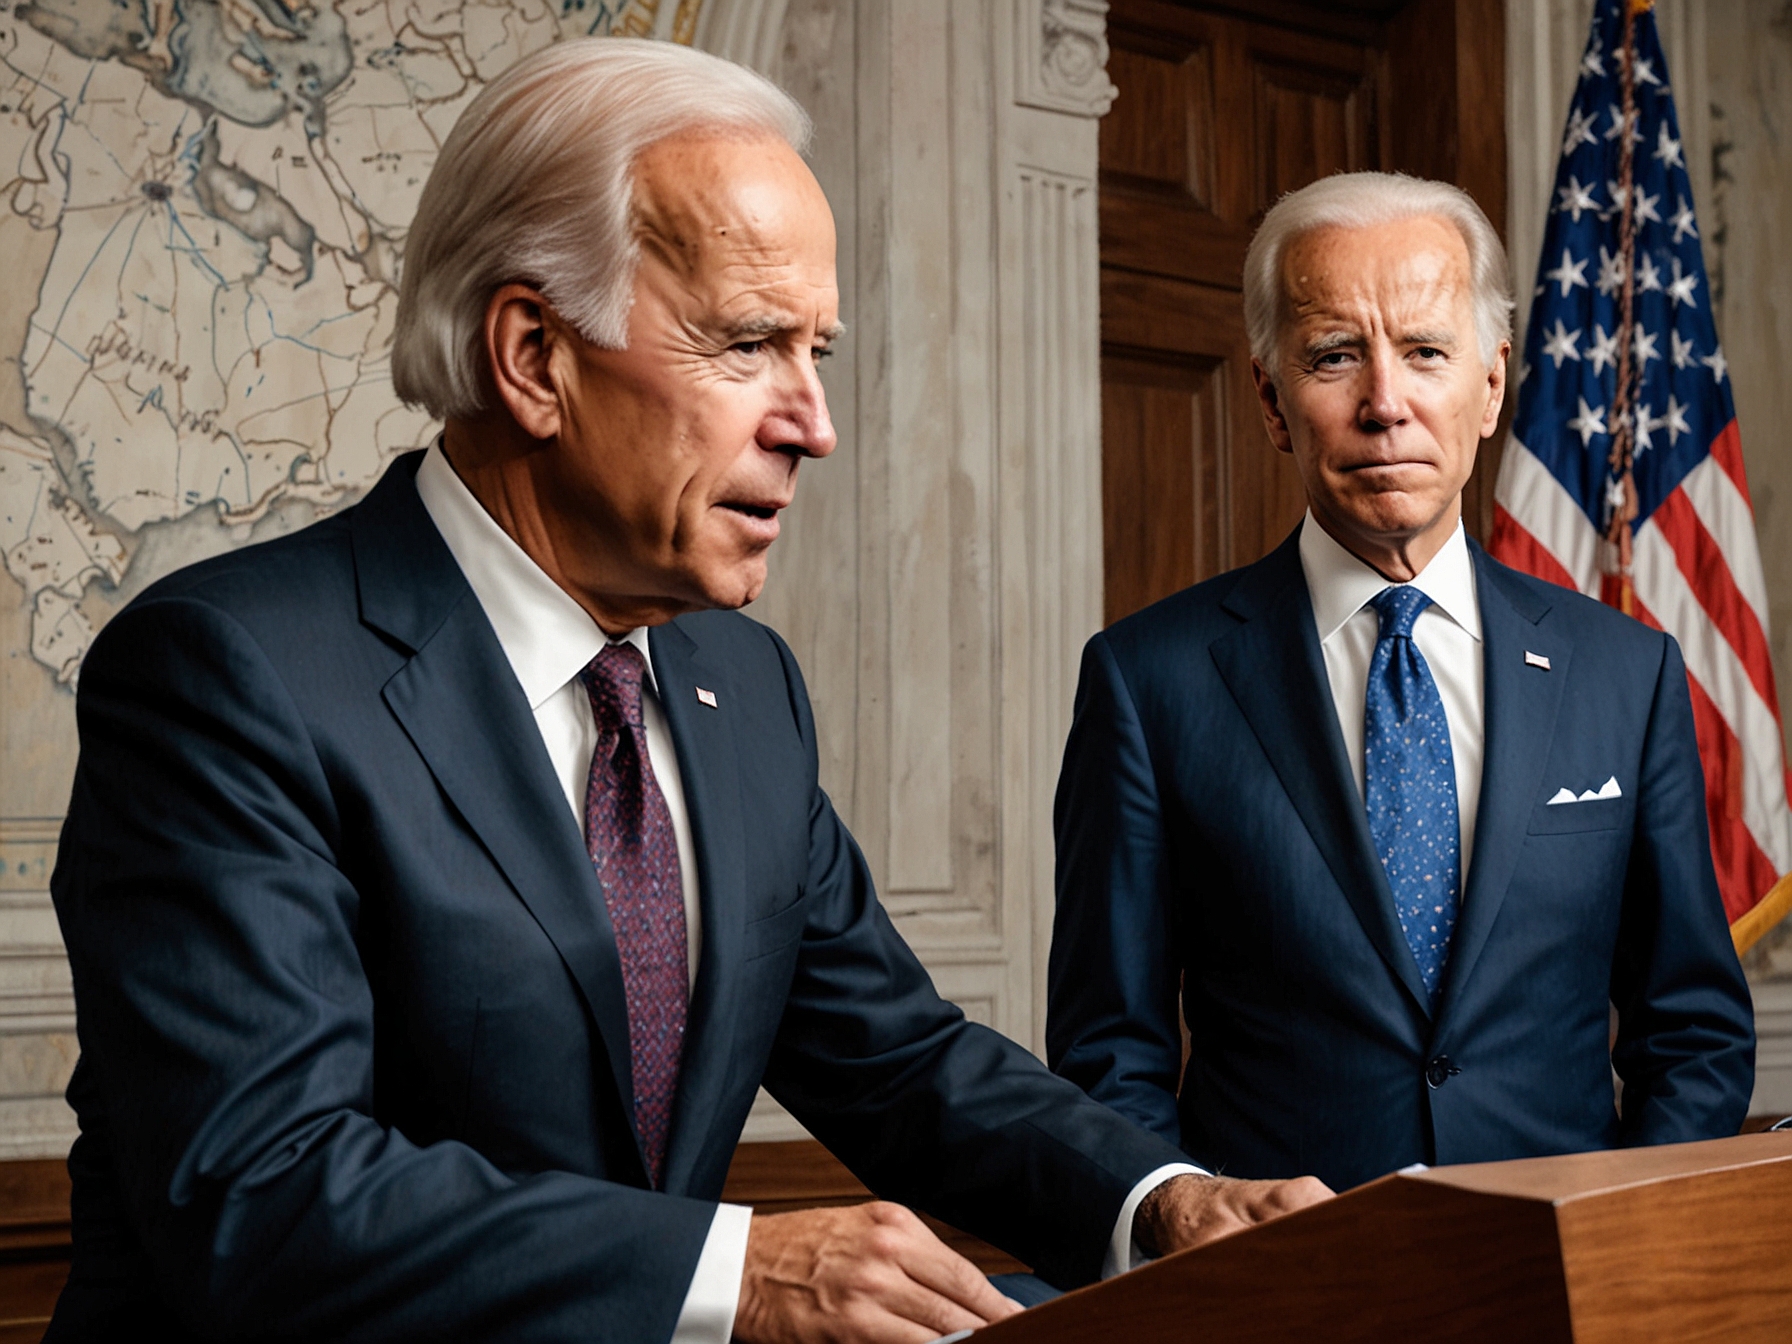 U.S. Secretary of State Antony Blinken and President Joe Biden during a press briefing, facing criticism and showing the strain of managing the volatile situation in the Middle East.